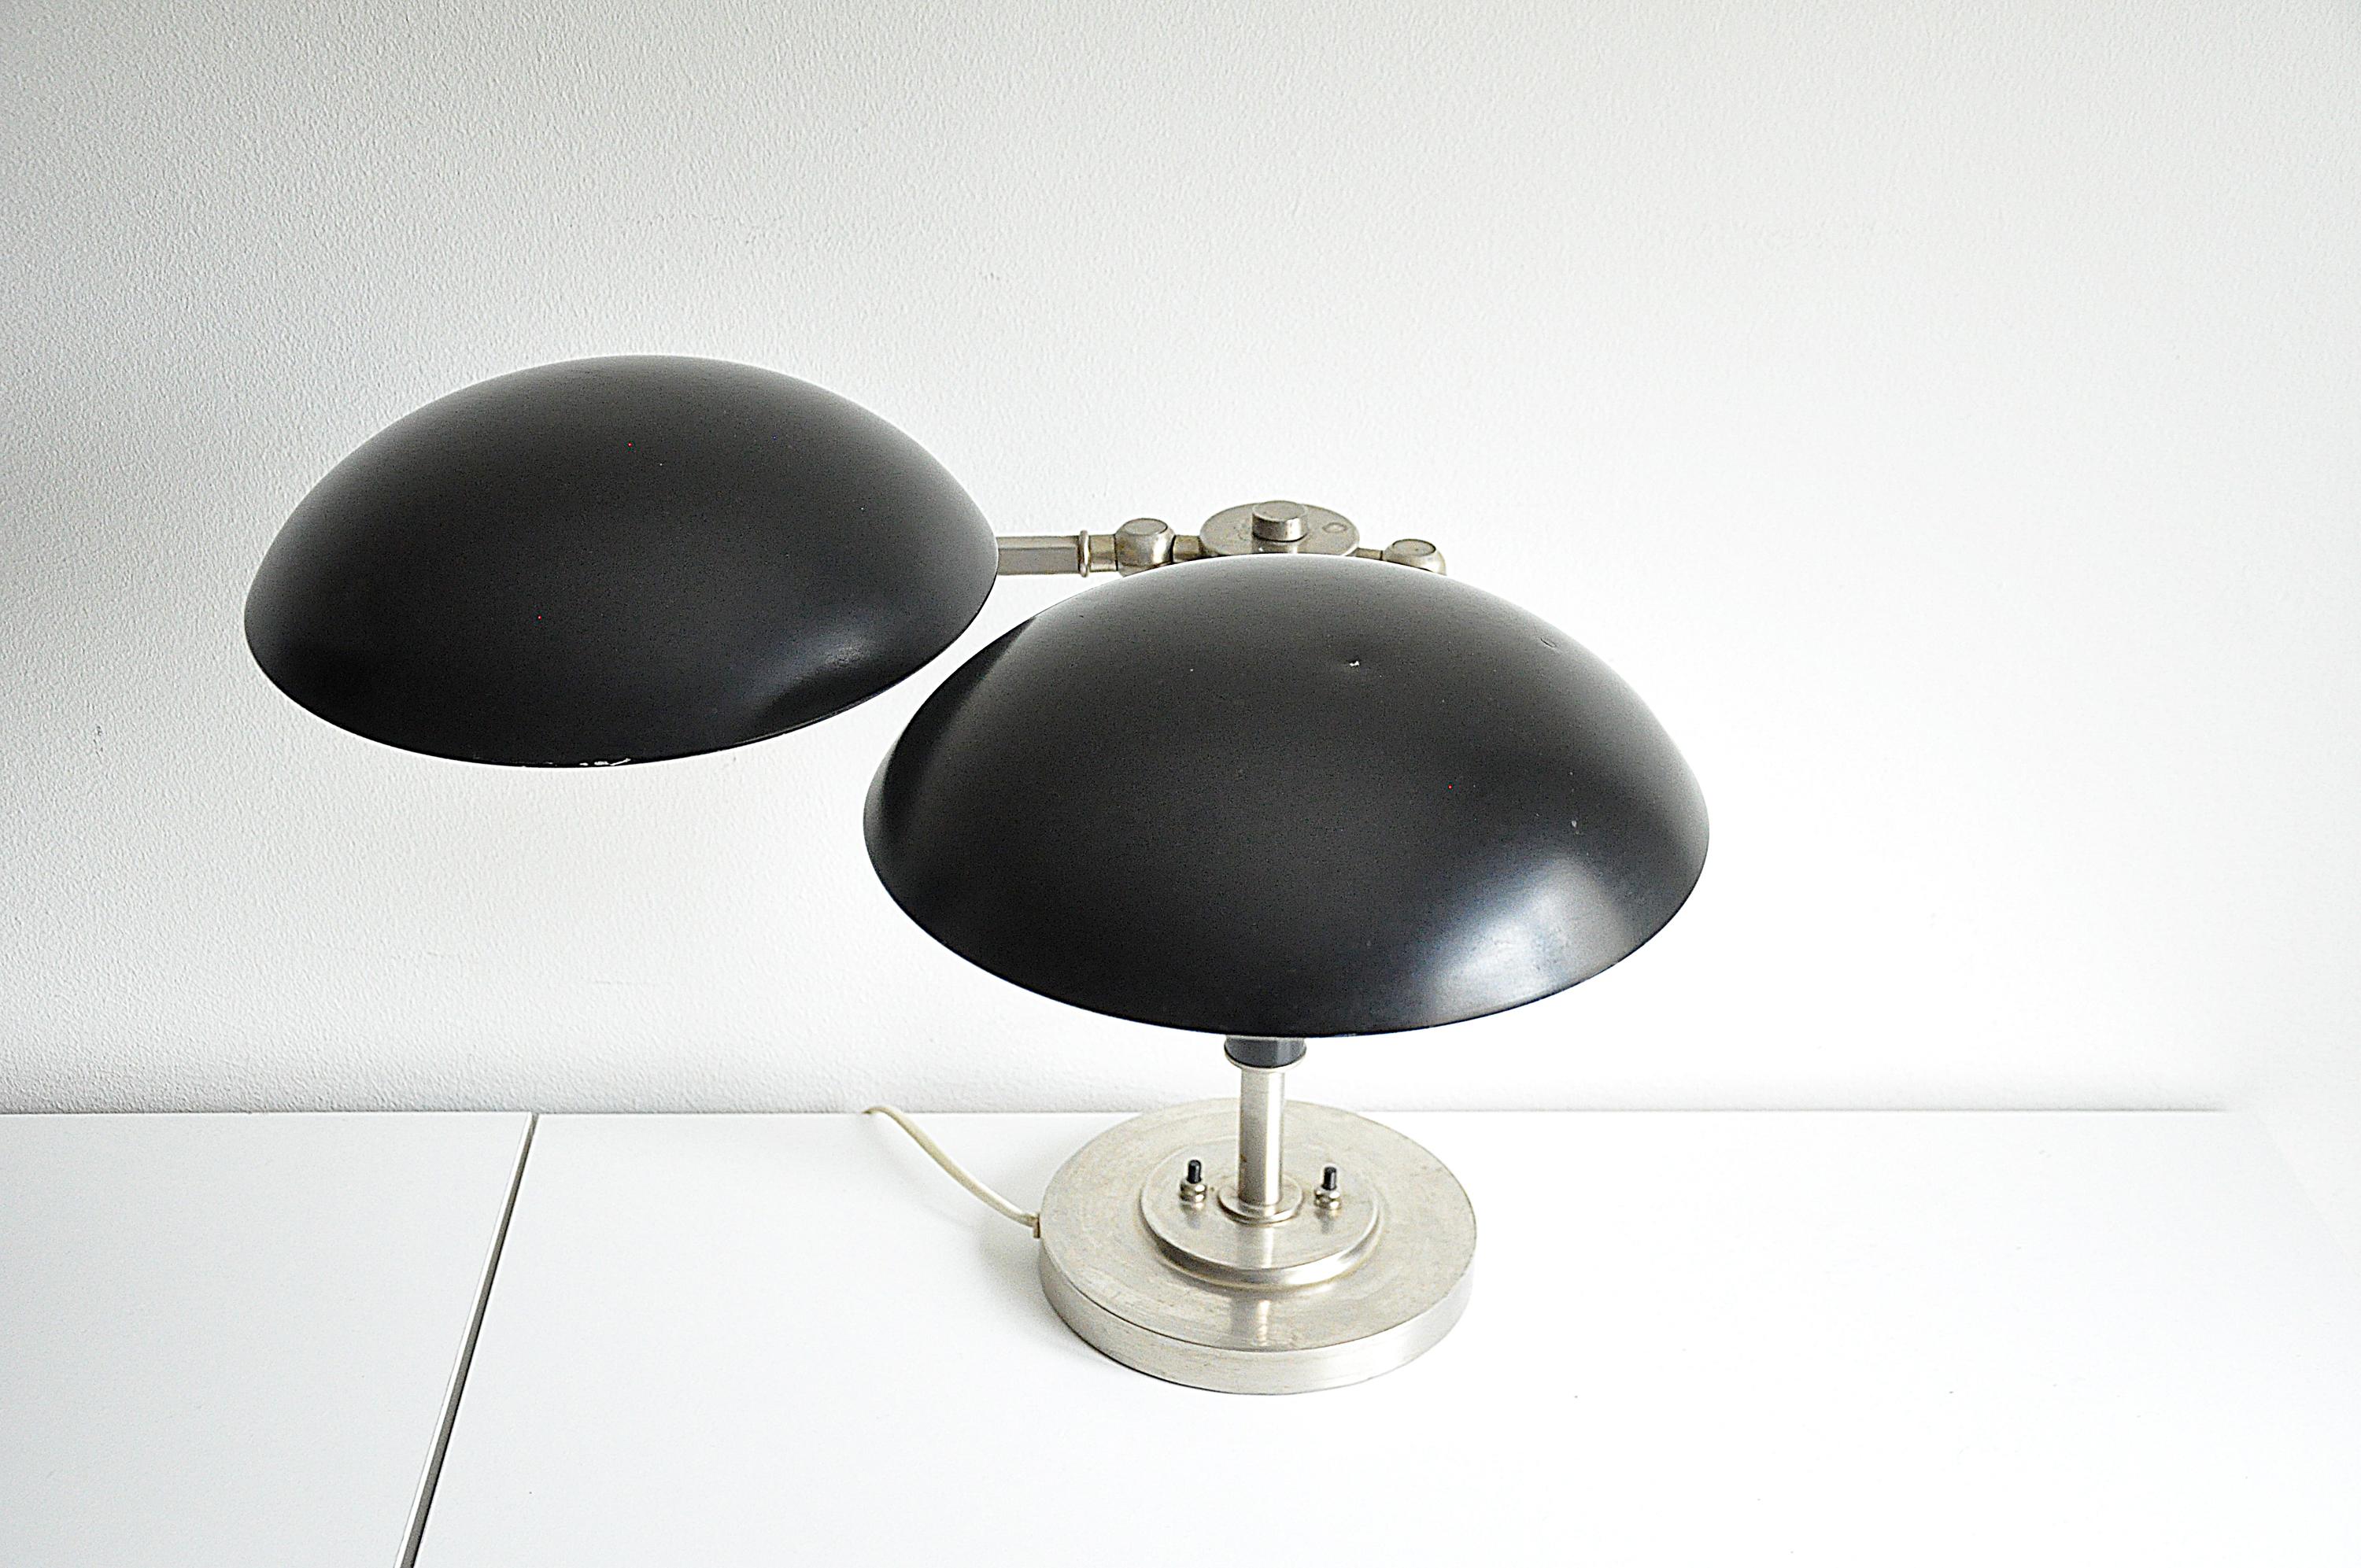 Two-Arm Table Lamp with a Small Mirror, 1930s For Sale 3